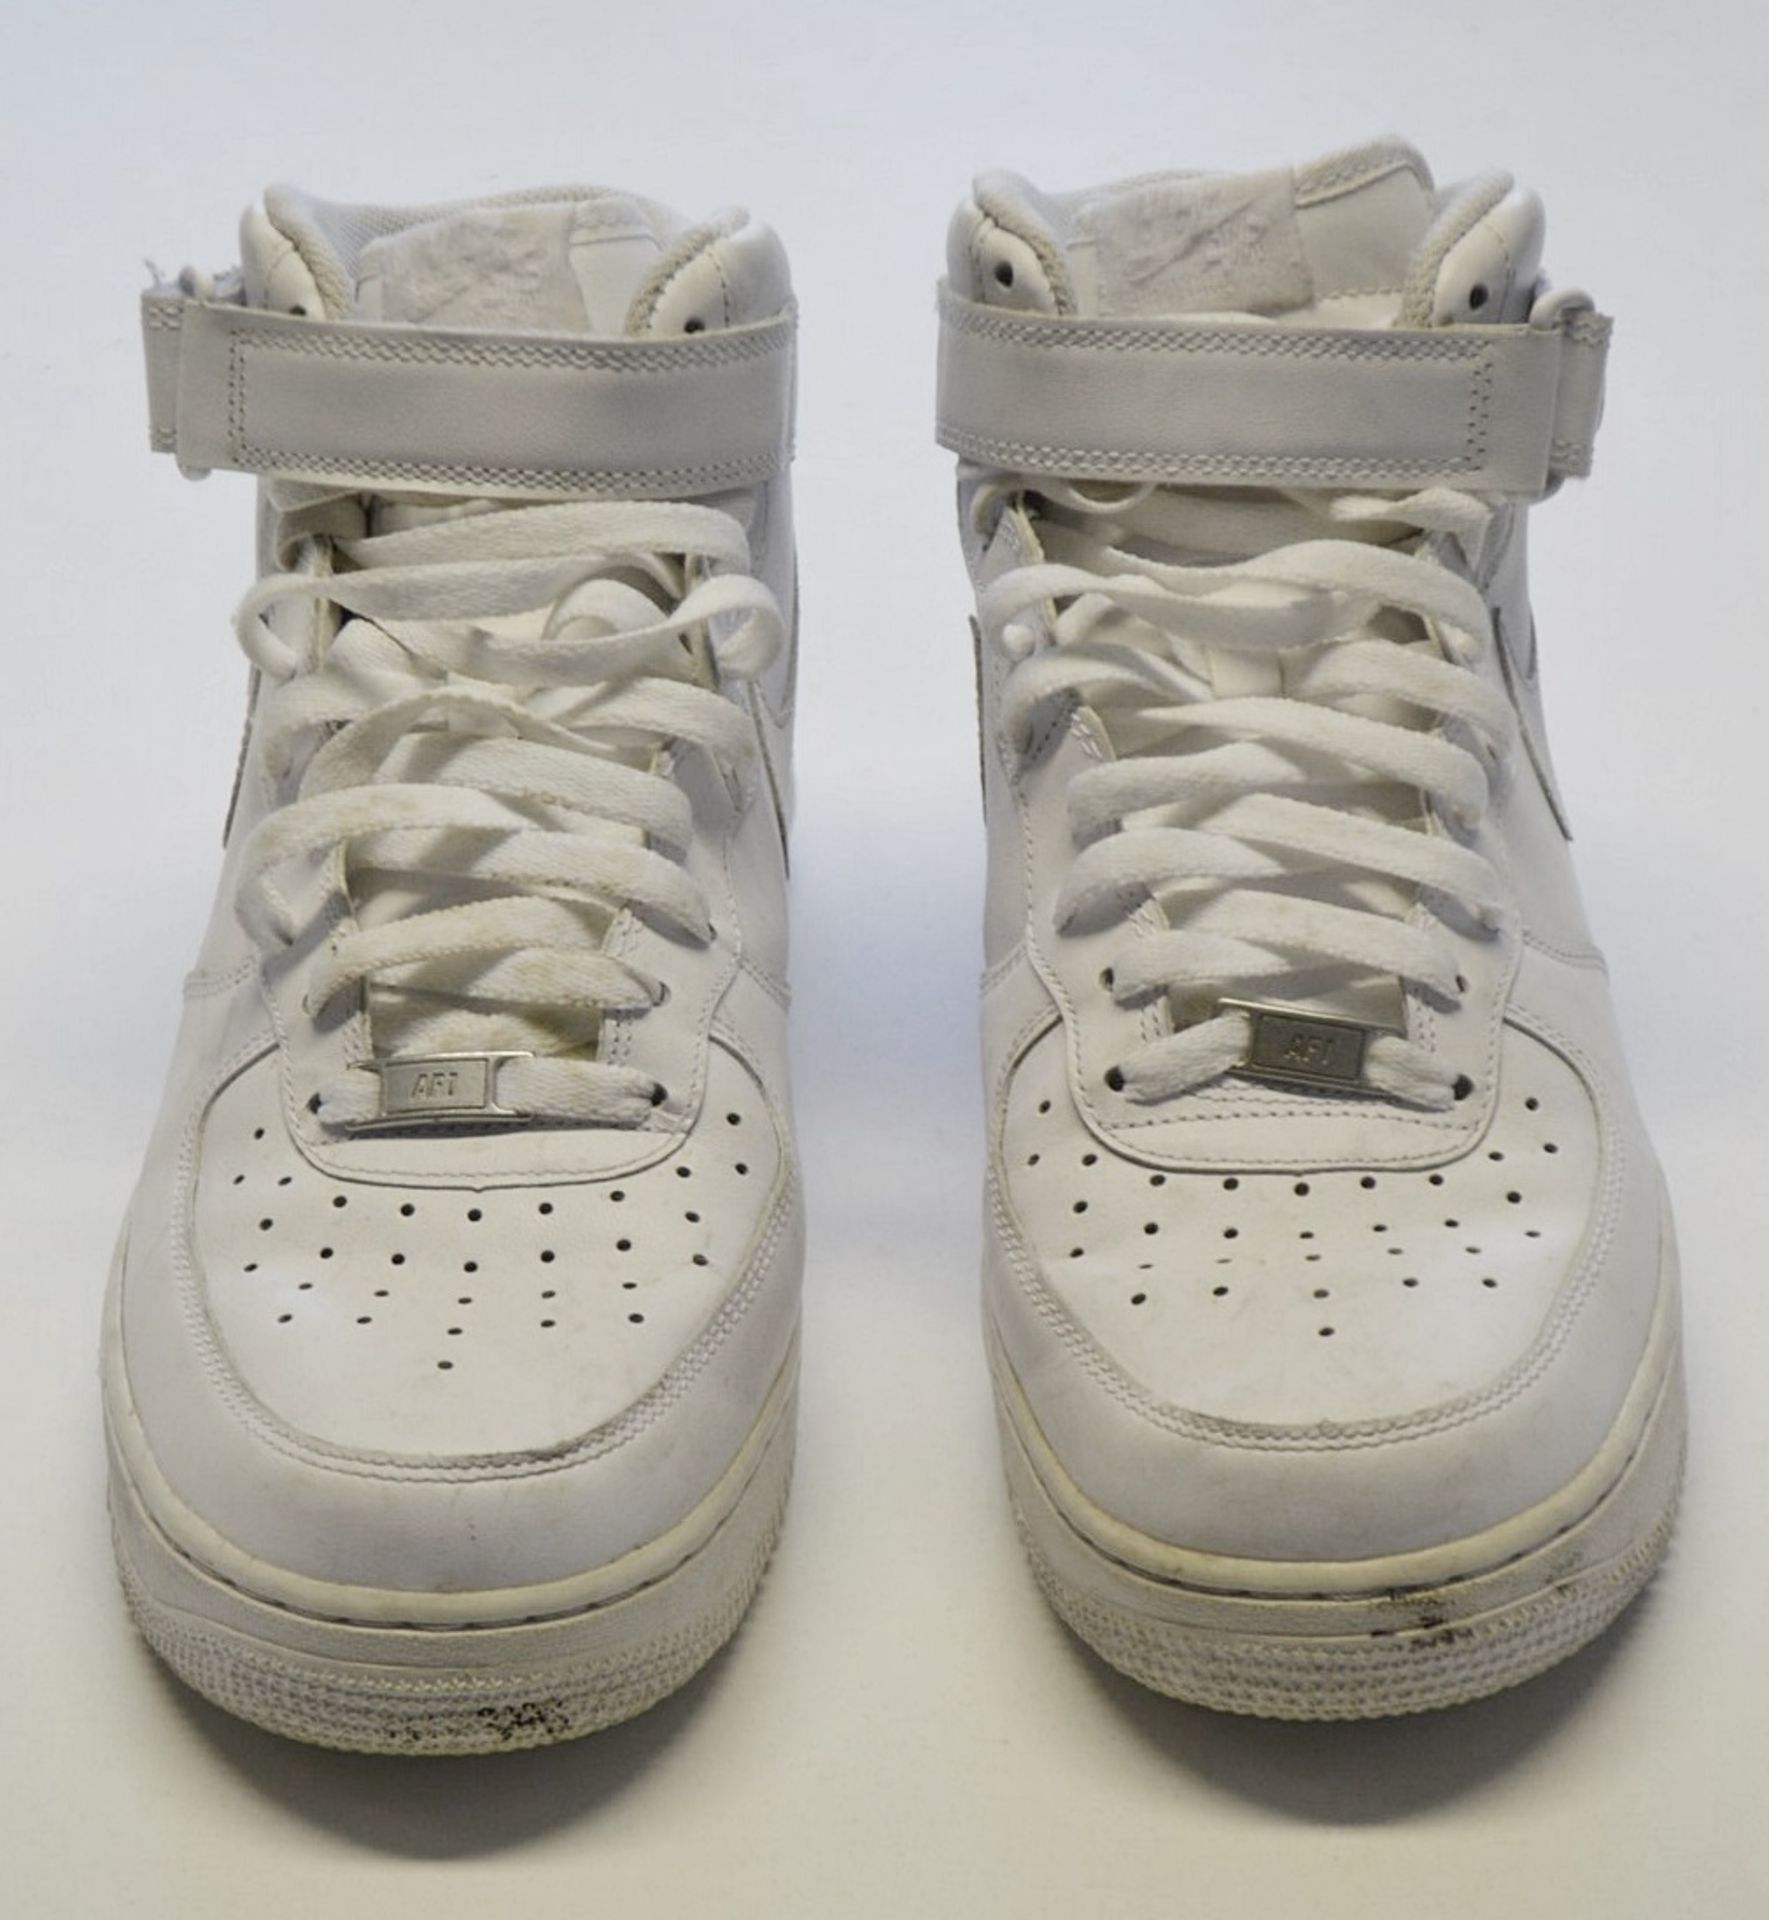 1 x Pair Of Men's Genuine Nike 'Air Force 1 Mid' Trainers In White - Size (EU/UK): 44.5/9.5 - - Image 3 of 6